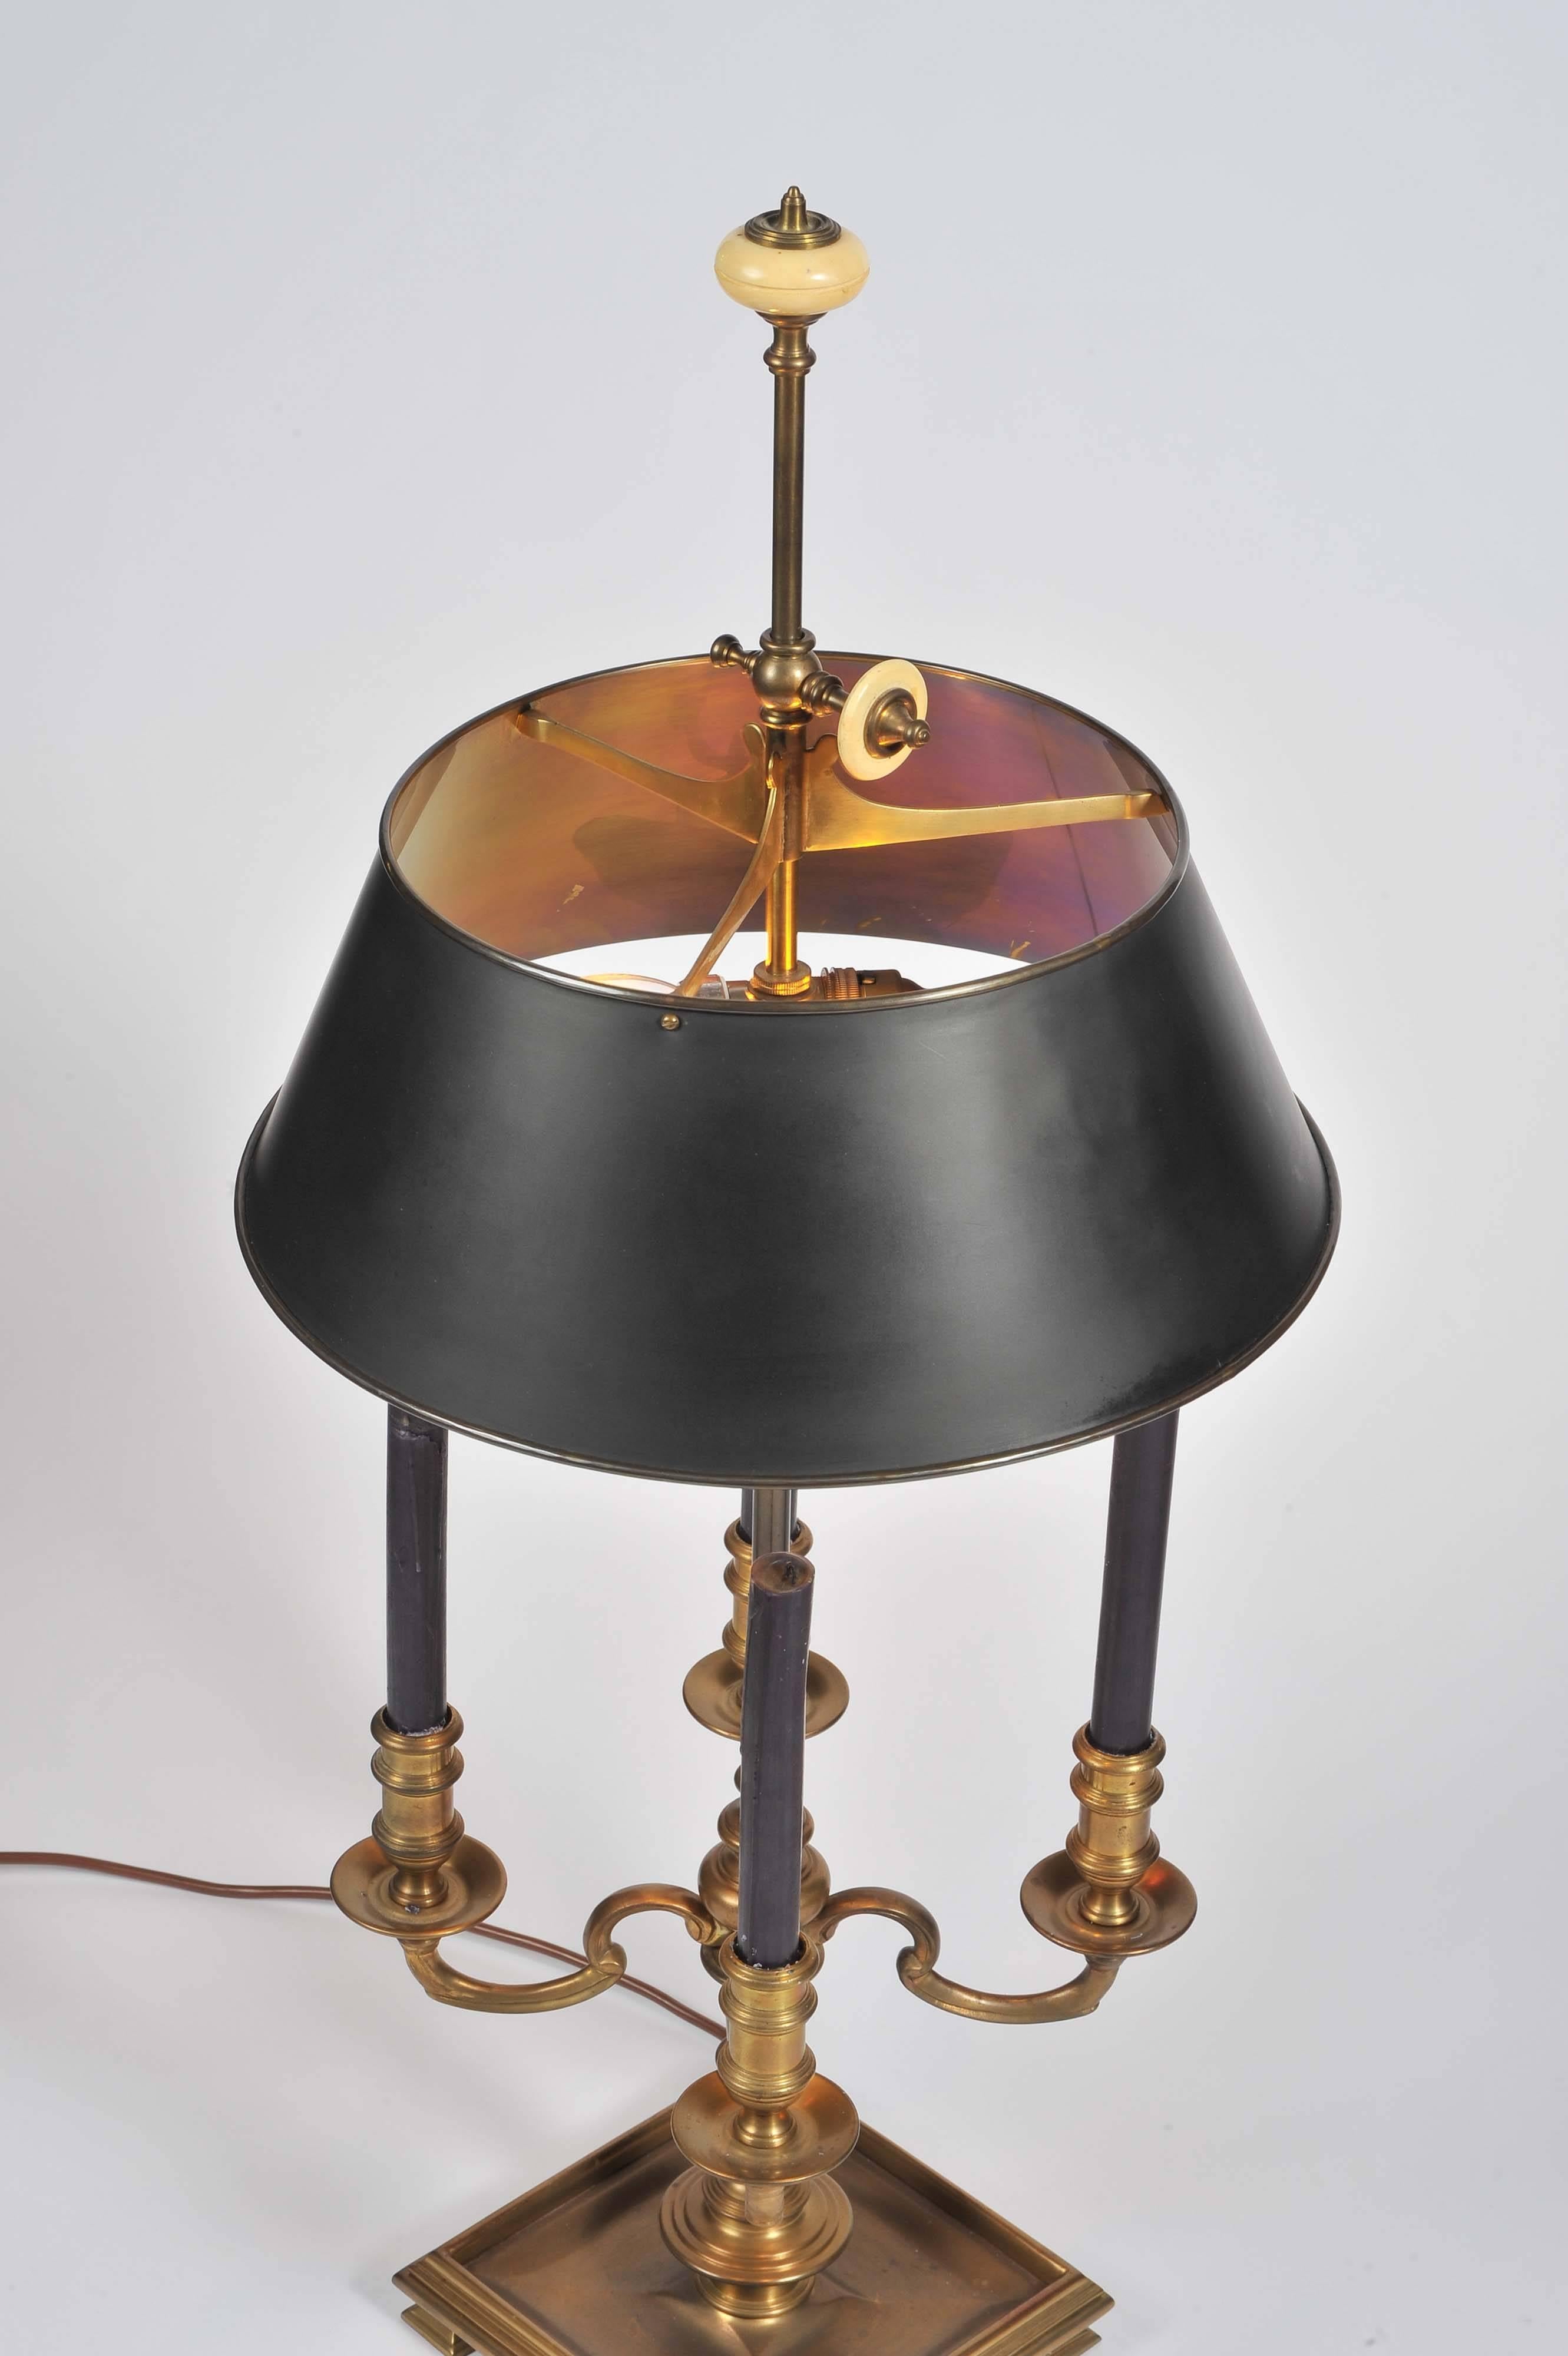 An elegant four branch brass Bouillotte table lamp with height adjustable toleware shade and fittings for two bulbs. The brass a very subtle antiqued finish.